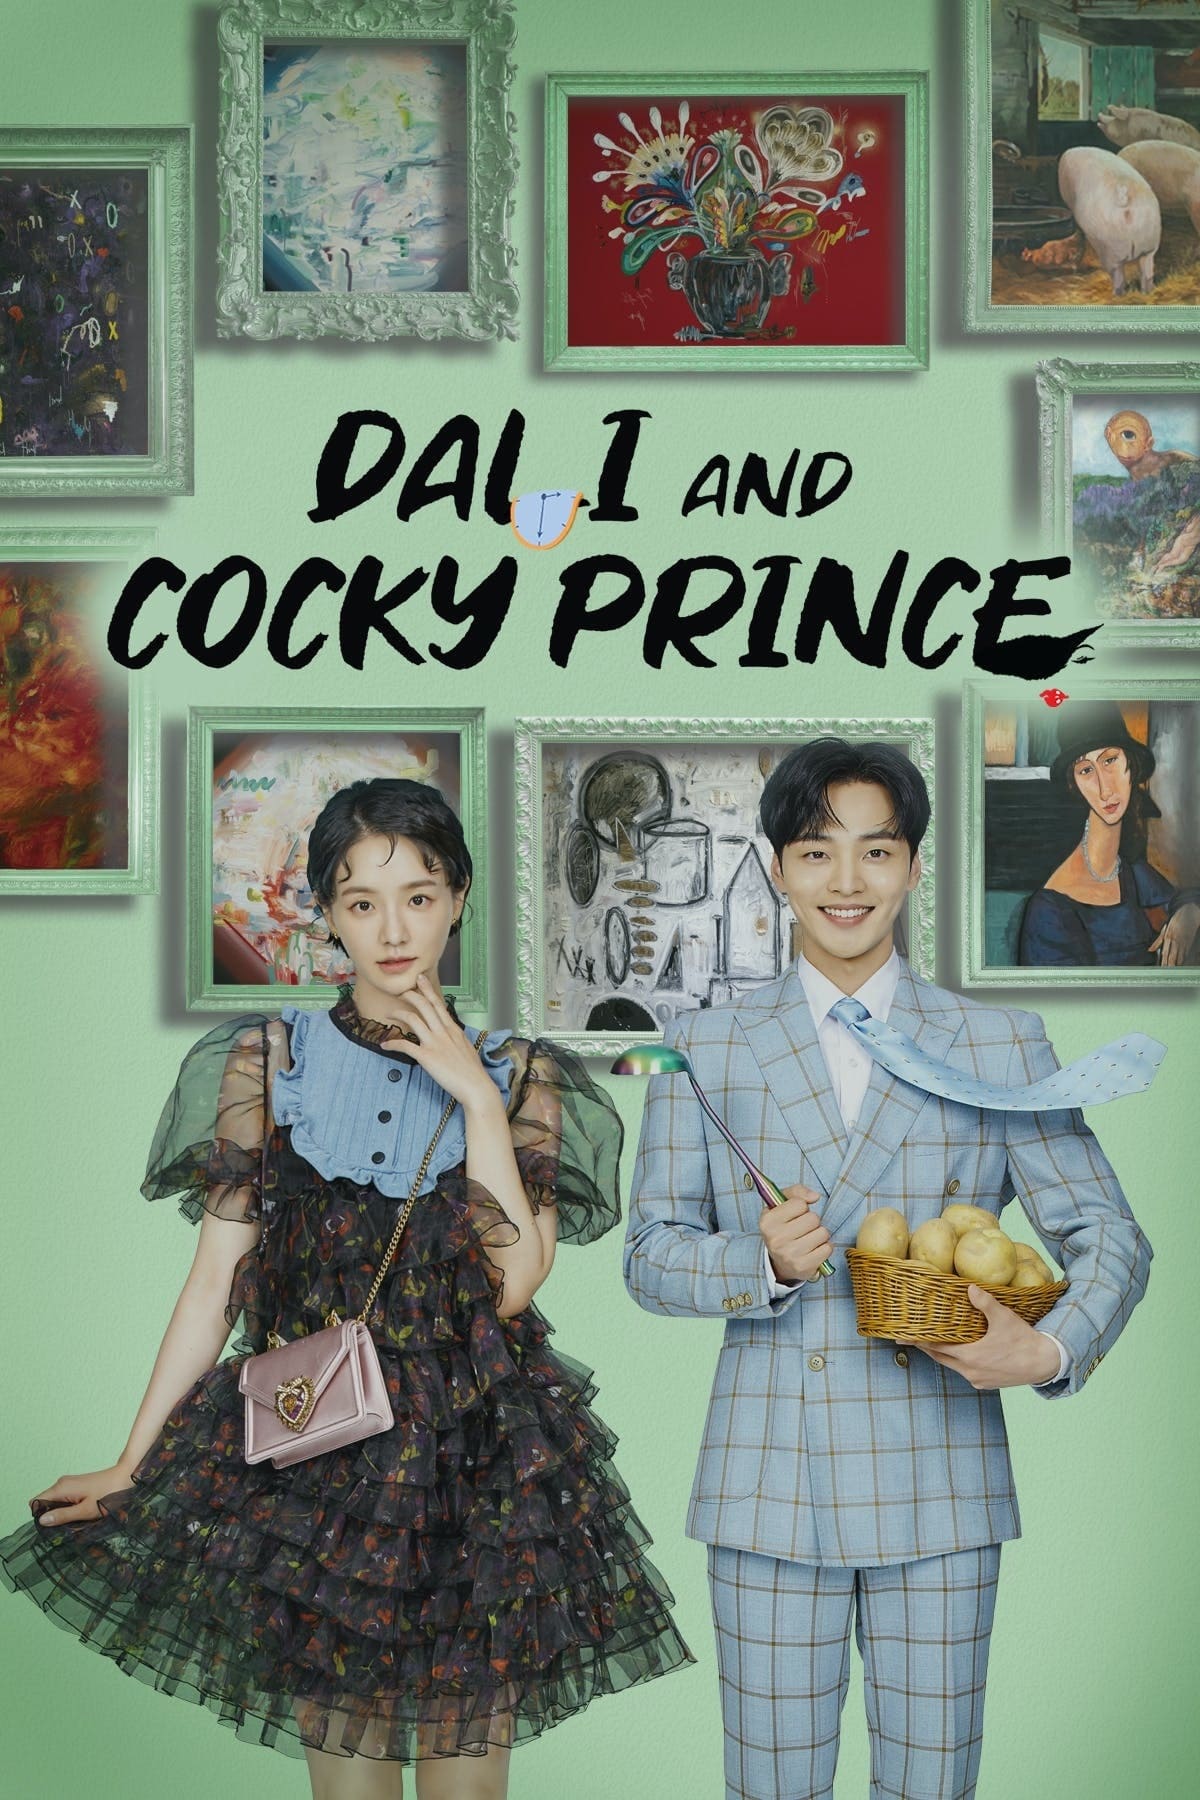 Dali and the Cocky Prince